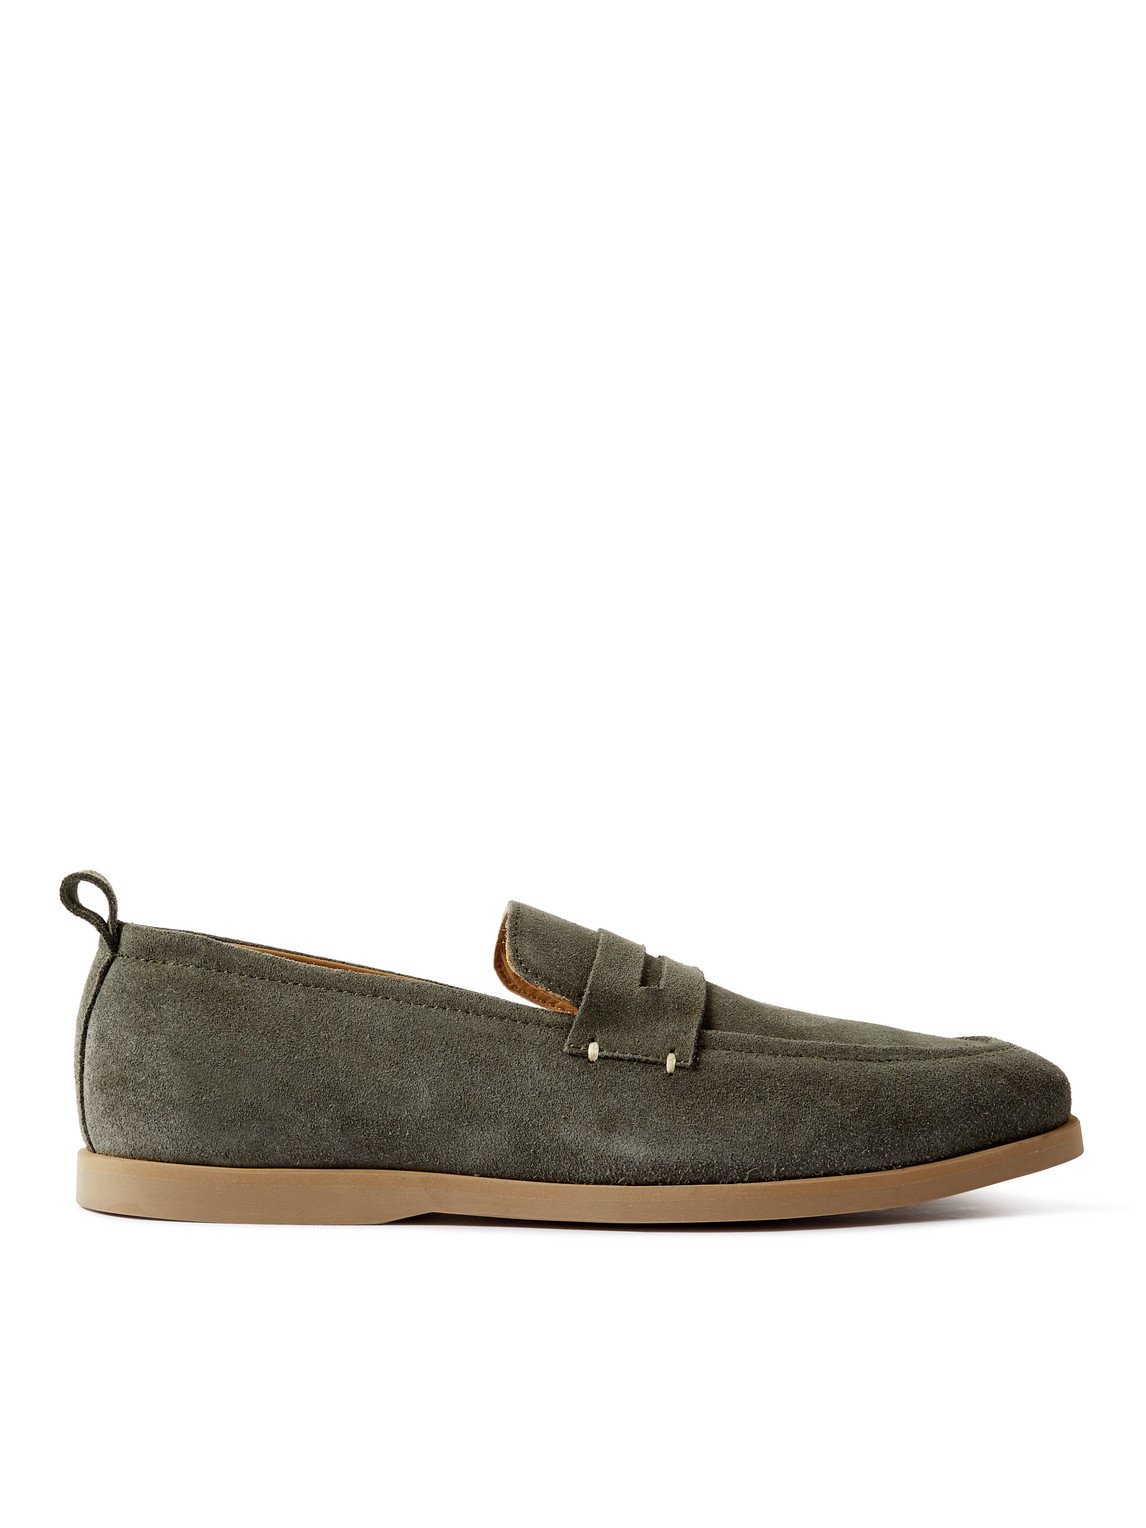 Regenerated Suede by evolo® Penny Loafers